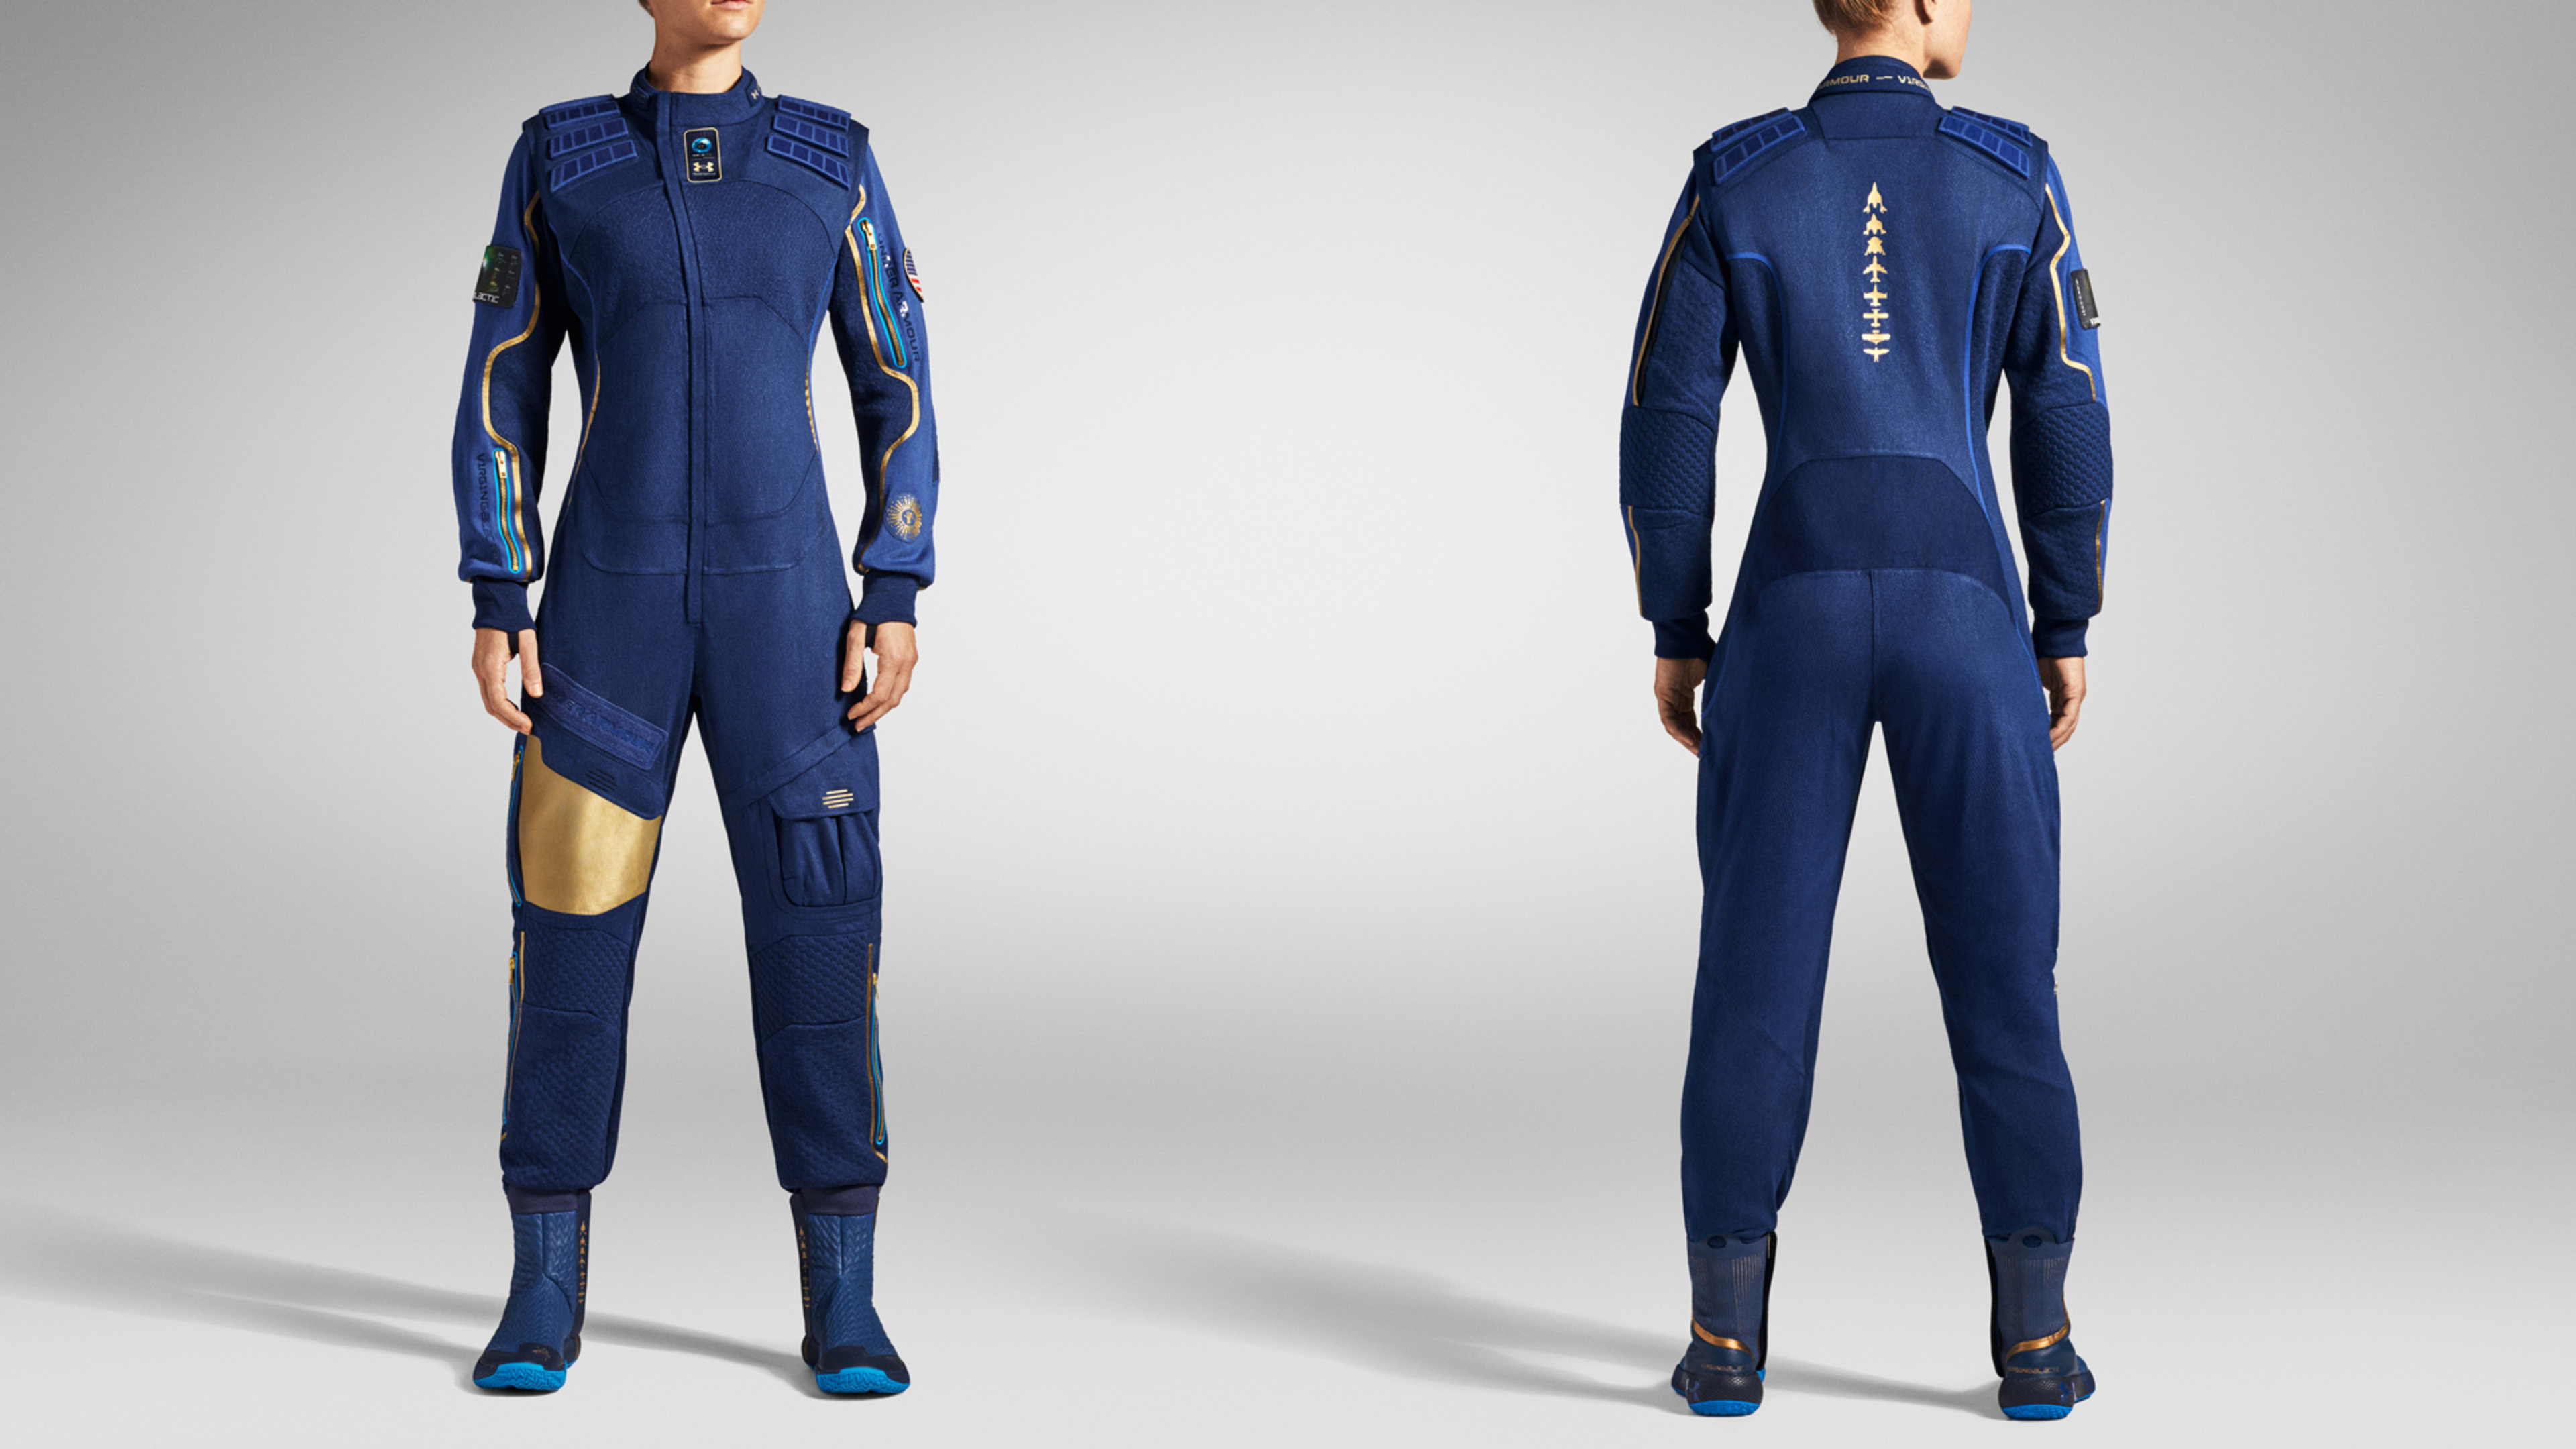 Under Armour and Virgin Galactic unveil world’s first commercial space suit